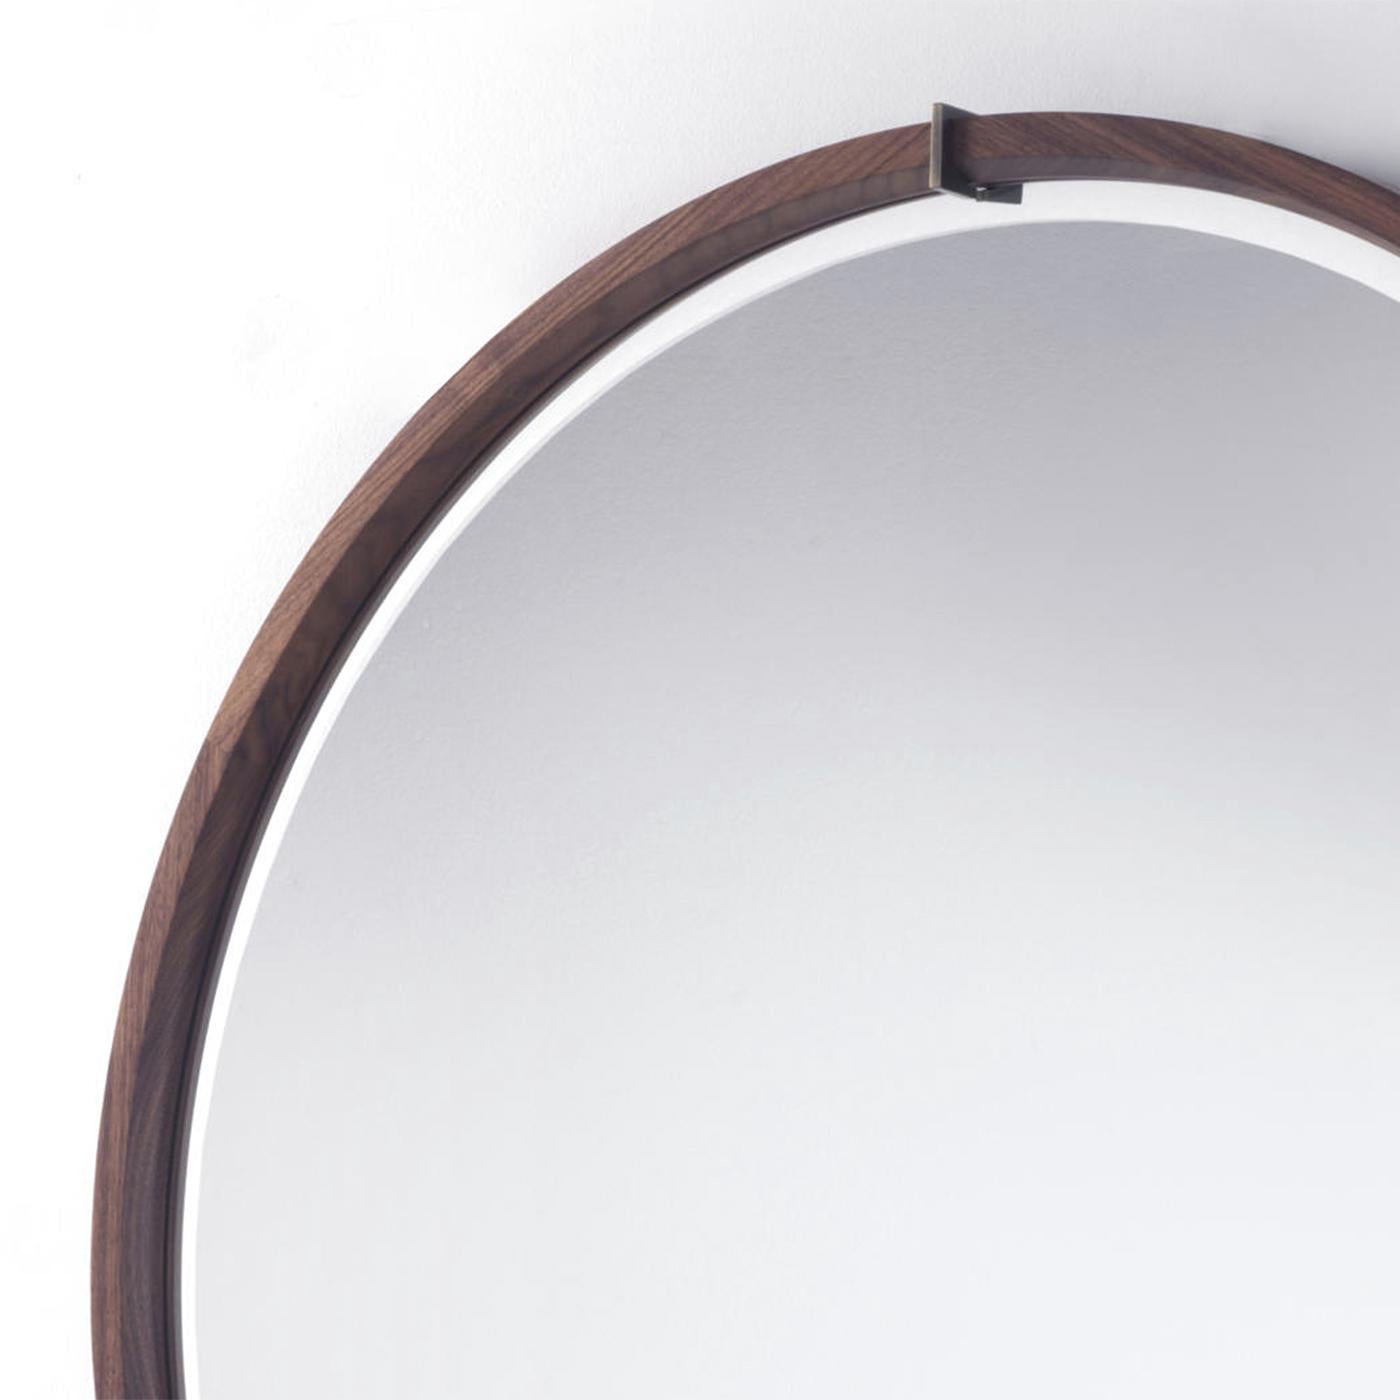 Mirror Mark Round with solid walnut wood round frame
with 3 brushed bronzed solid brass inserts. With round
bevelled mirror glass.